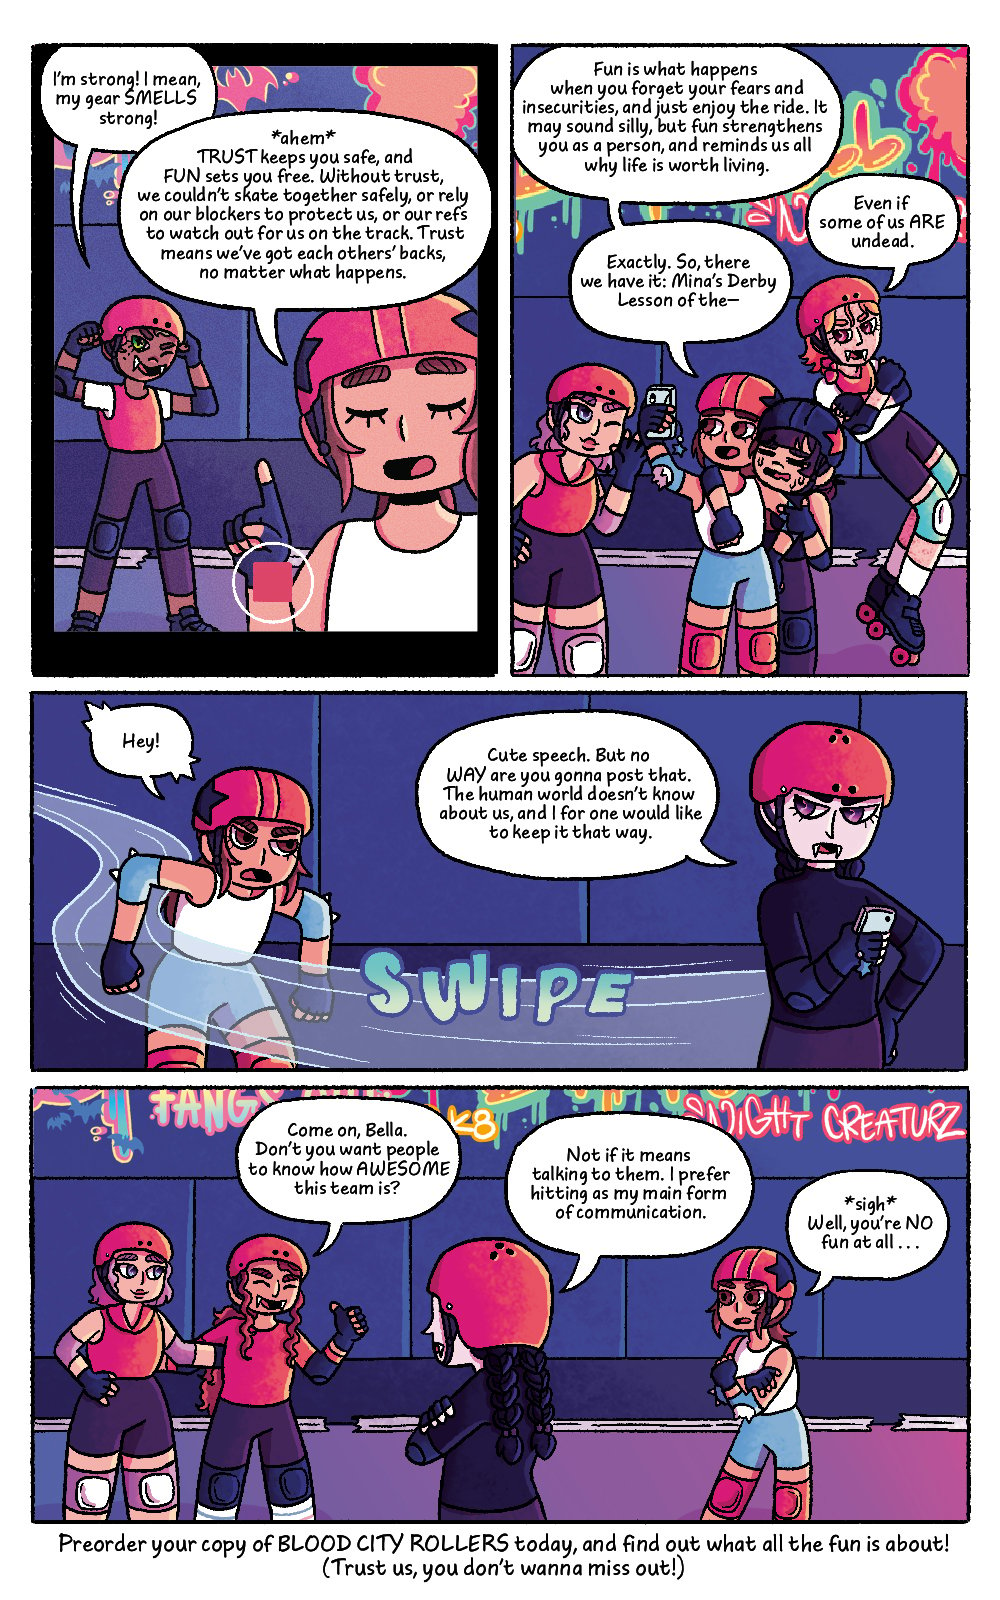 Four panel comic featuring the characters from Bat City Rollers, set on a roller derby rink. Comic panel one shows a close up of Mina's phone screen showing Mina talking into her camera with another player behind her, interrupting. The other character's speech bubble reads "I'm strong! I mean, my gear SMELLS strong!" Mina's speech bubble reads "*ahem* TRUST keeps you safe and FUN sets you free. Without trust, we couldn't skate together safely, or rely on our blockers to protect us, or our refs to watch out for us on the track. Trust means we've got each others' backs no matter what happens."
The second panel zoom's out to show Mina and her teammates hugging and gathered together on the track. Mina's speech bubble reads "Fun is what happens when you forget your fears and insecurities, and just enjoy the ride. It may sound silly, but fun strengthens you as a person, and reminds us all while life is worth living. A side character interrupts, their speech bubble reads "Even if some of us ARE undead." Mina continues, her second speech bubble reads "Exactly. SO tehre we have it: Mina's Derby Lesson of the -"
The third panel shows Mina's teammate Bella skating past quickly, grabbing Mina's phone and looking annoyed. Mina's speech bubble says "Hey!", in surprise. The other character's speech bubble reads "Cute speech. But no WAY are you gonna post that. The human world doesn't know about us, and I for one would like to keep it that way."
The fourth panel shows Mina and a few teammates talking on the track, as well as Bella. Two teammates try to convince Bella to let Mina post the video. Their speech bubble reads "Come on, Bella. Don't you want people to know how AWESOME this team is?" Bella's speech bubble reads "Not if it means talking to them. I prefer hitting as my main form of communication." Mina's speech bubble reads "*sigh* Well, you're NO fun at all.."
There is text below the final panel that reads "Preorder your copy of BLOOD CITY ROLLERS today, and find out what the fun is all about! (Trust us, you don't wanna miss out!)